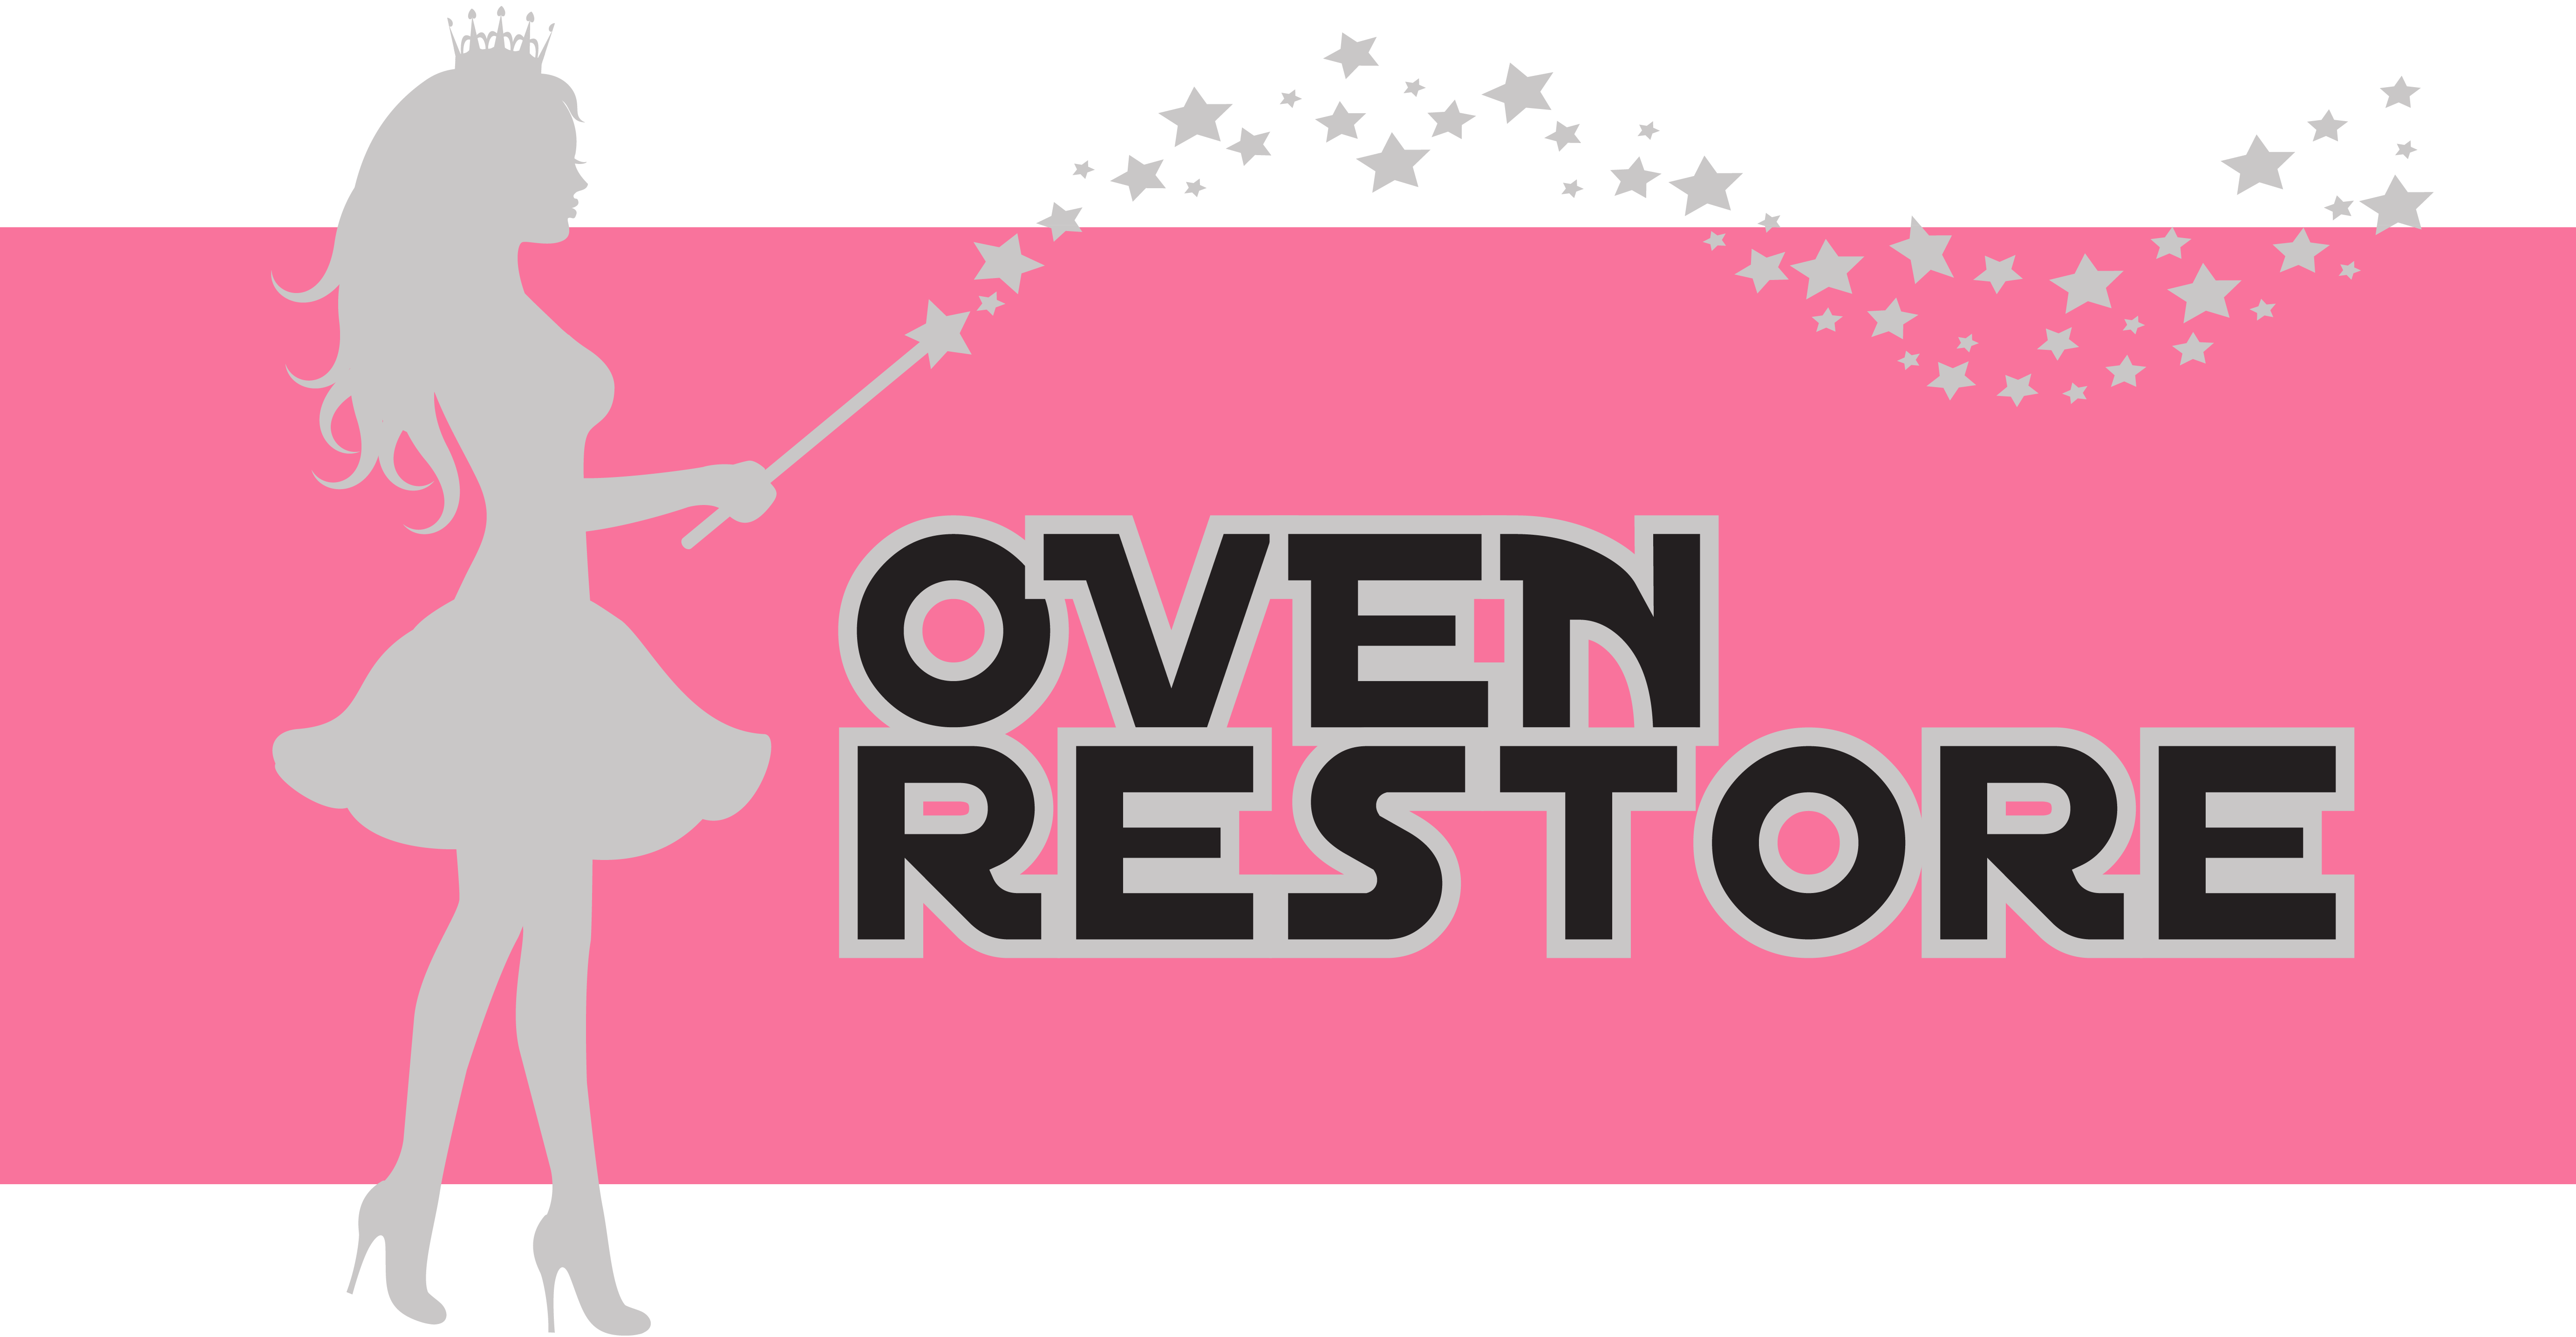 Oven Restore Fairy Logo. Give Us a Call or Drop Us a Line. Contact phone email address